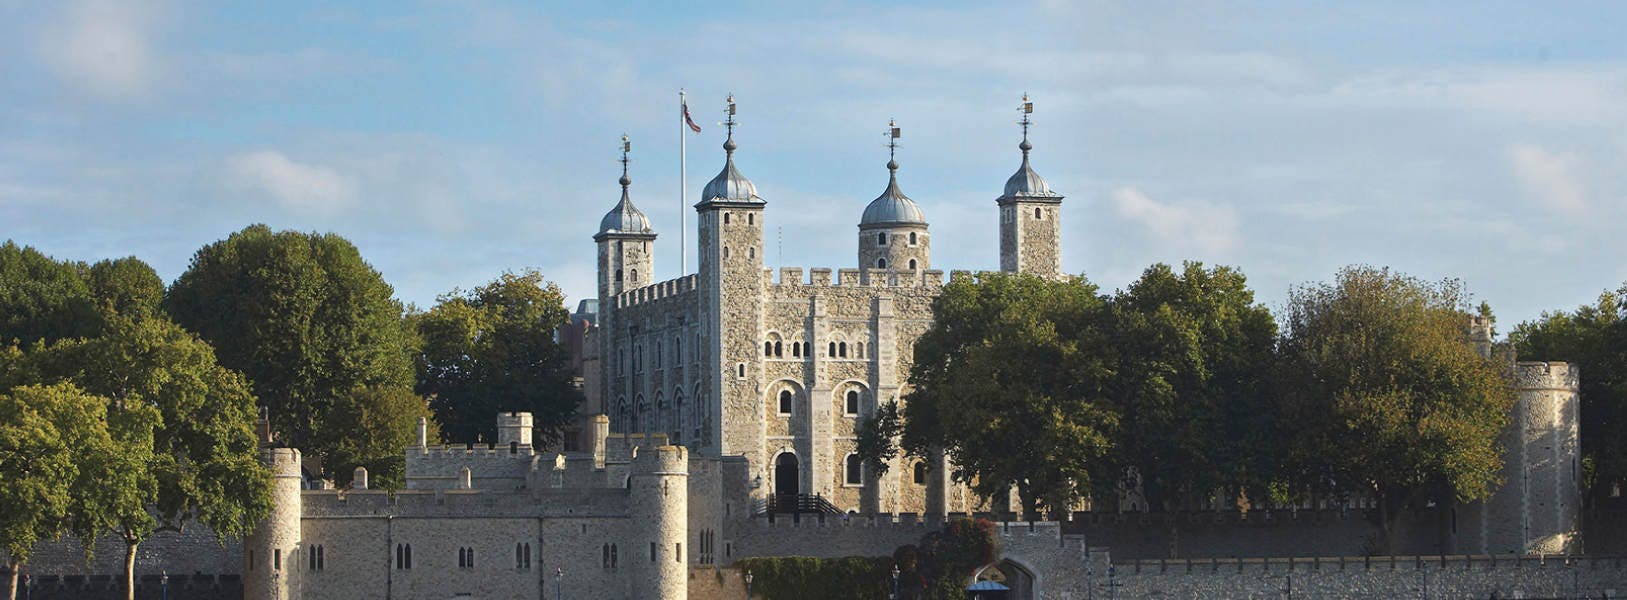 Visit the Tower of London, Tower of London